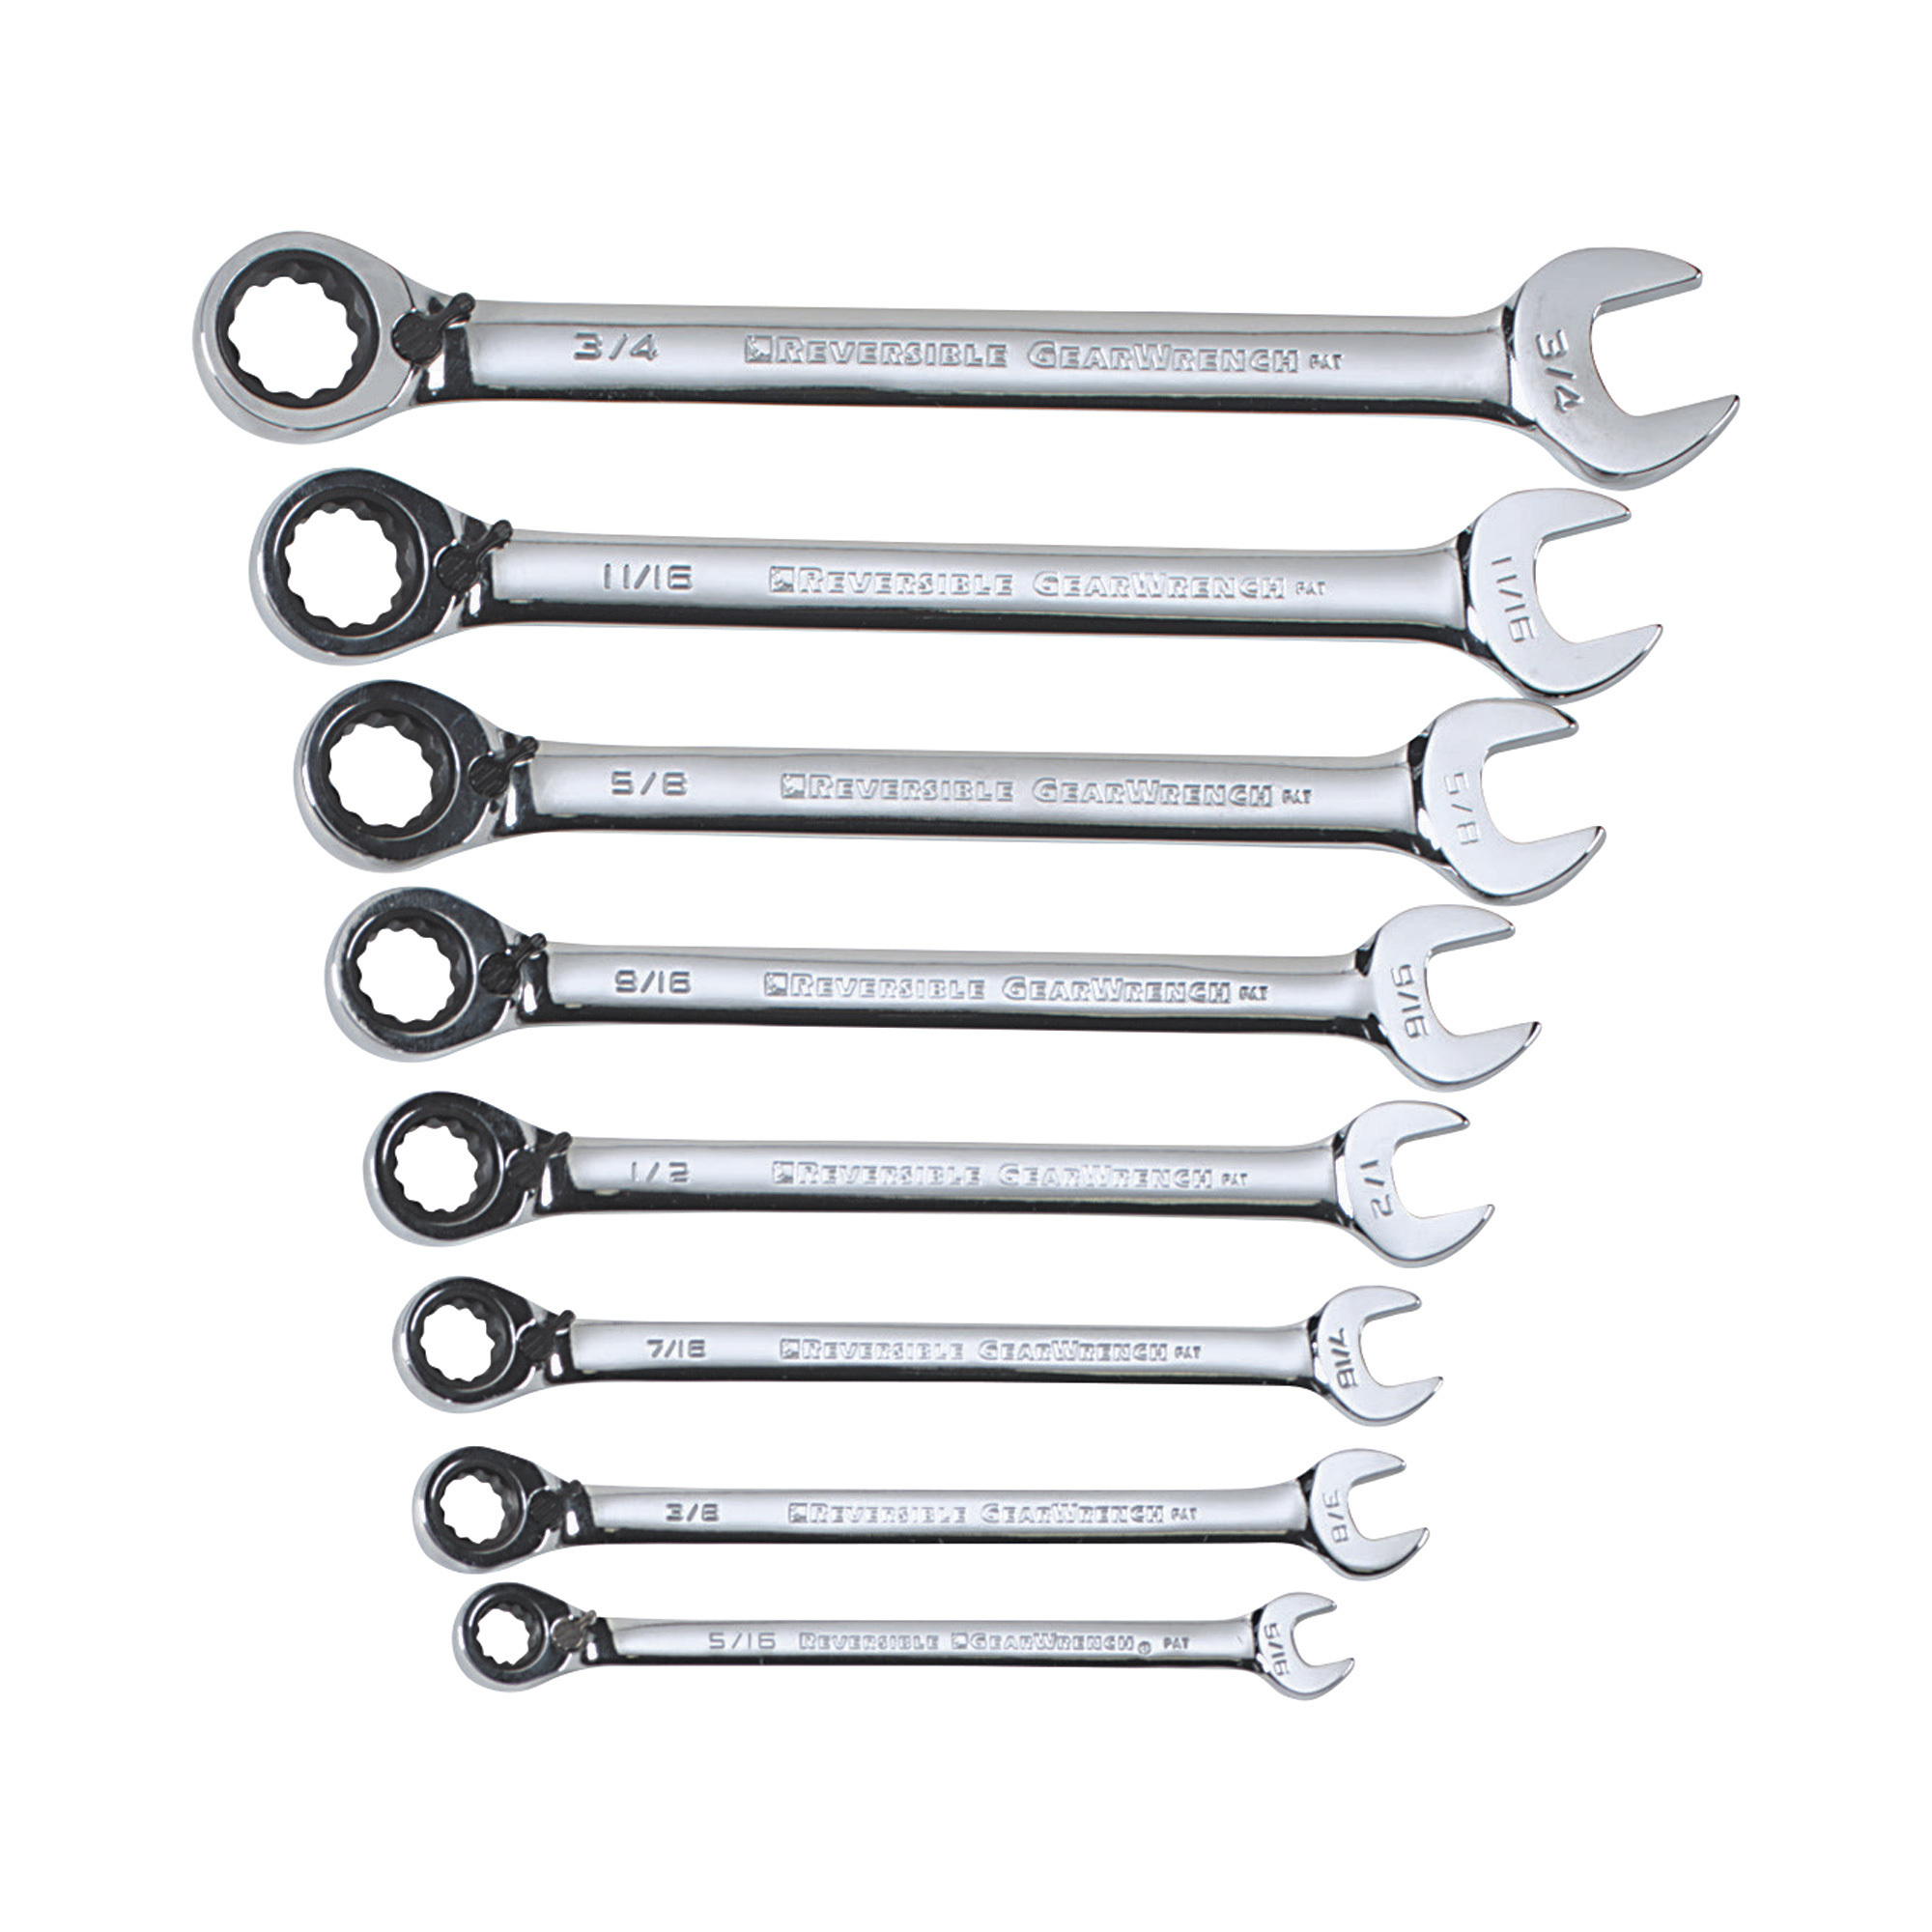 GearWrench Ratchet Wrenches, 8-Piece SAE Set, Model 9533N